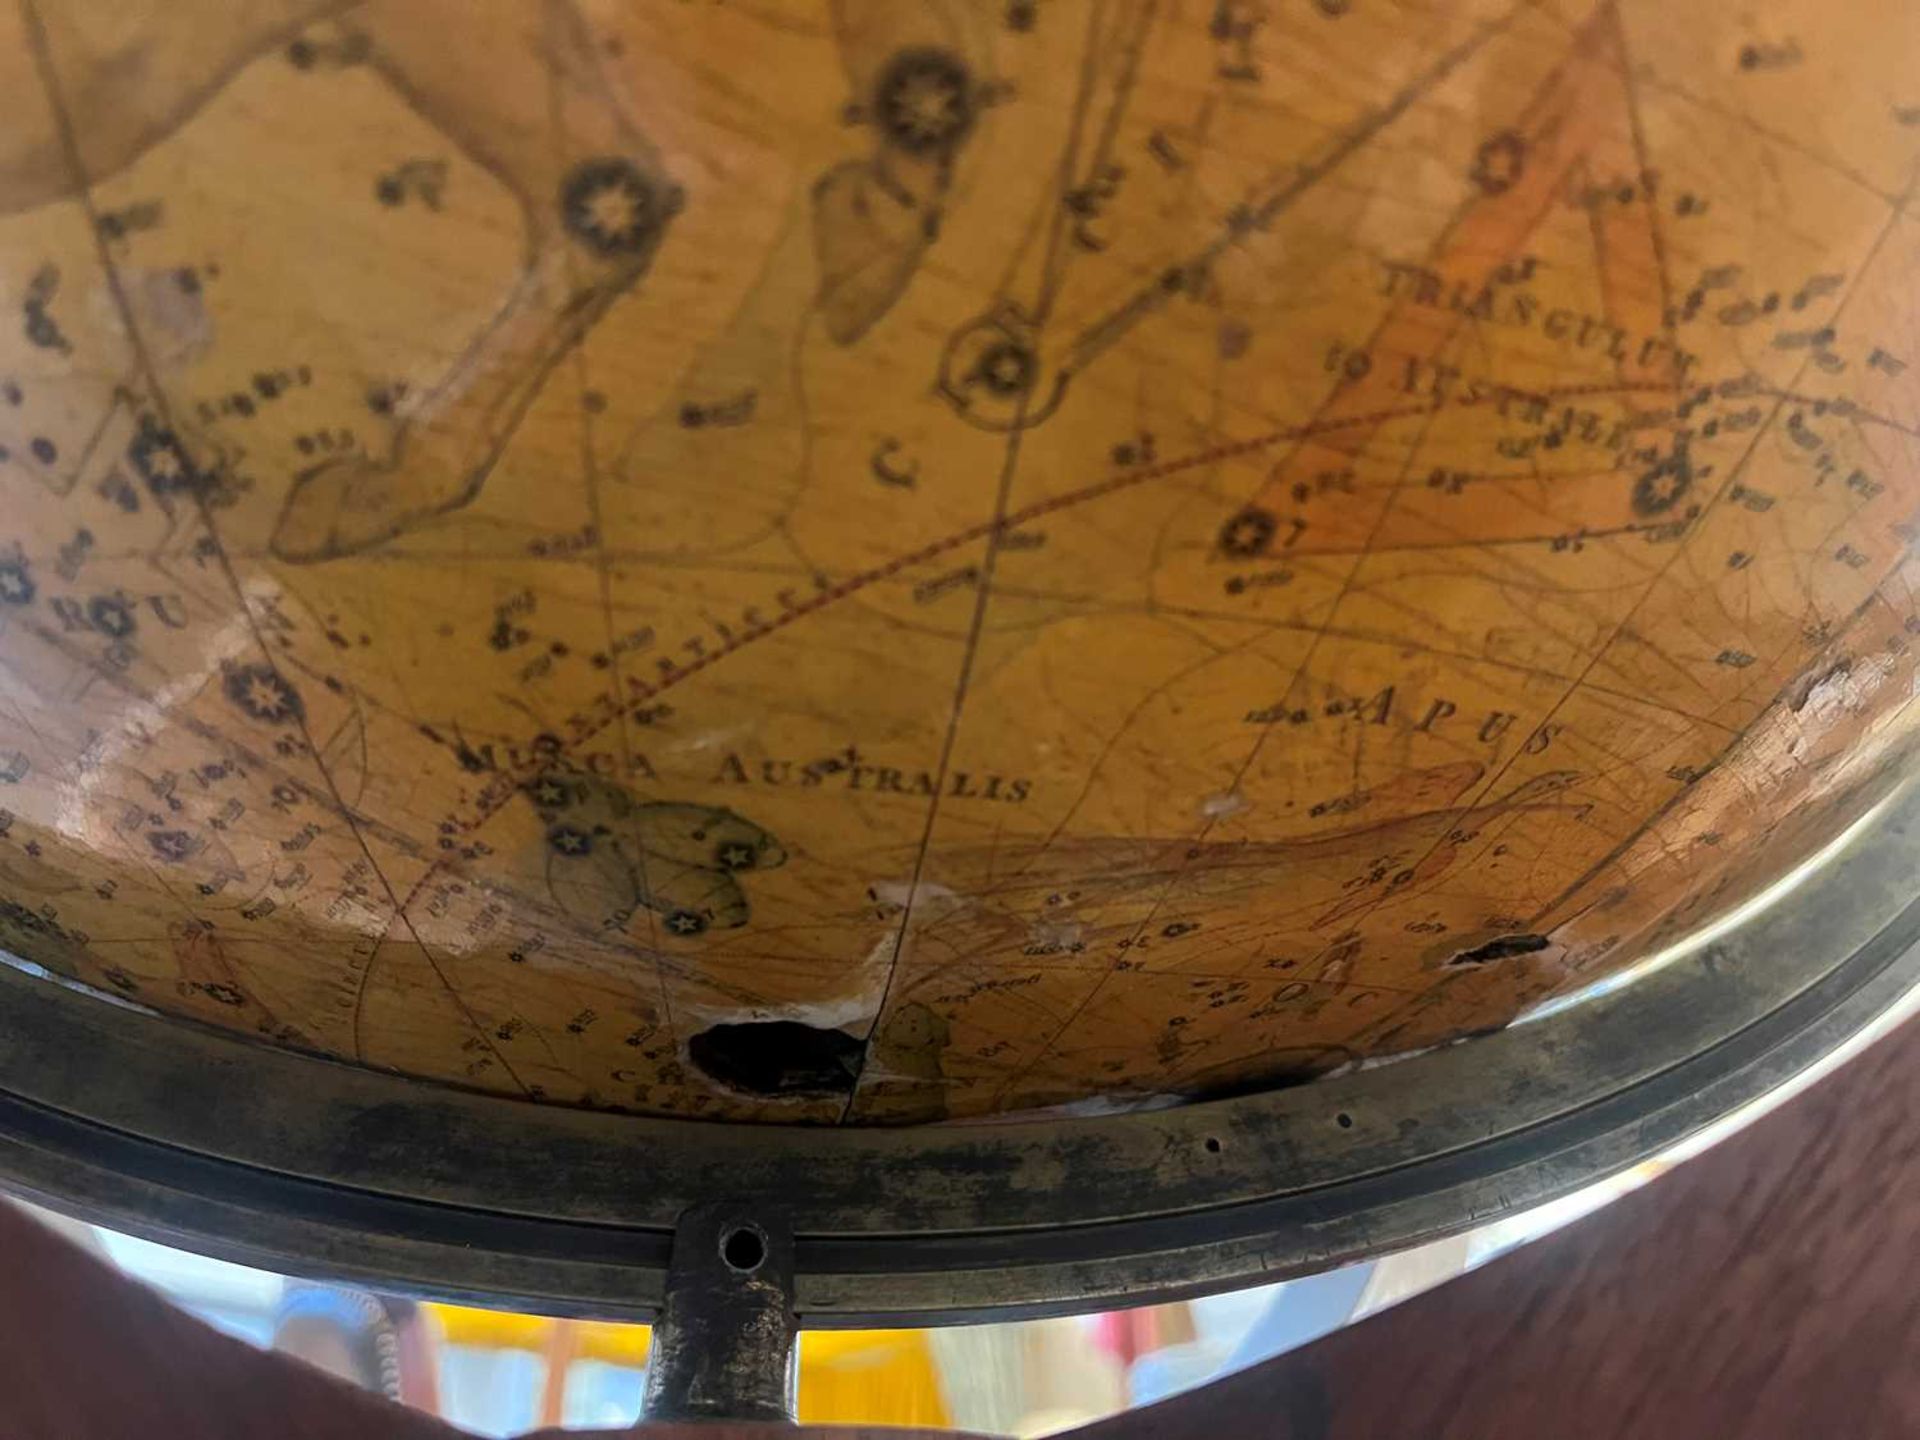 A large celestial library globe by J & W Cary, - Image 38 of 84